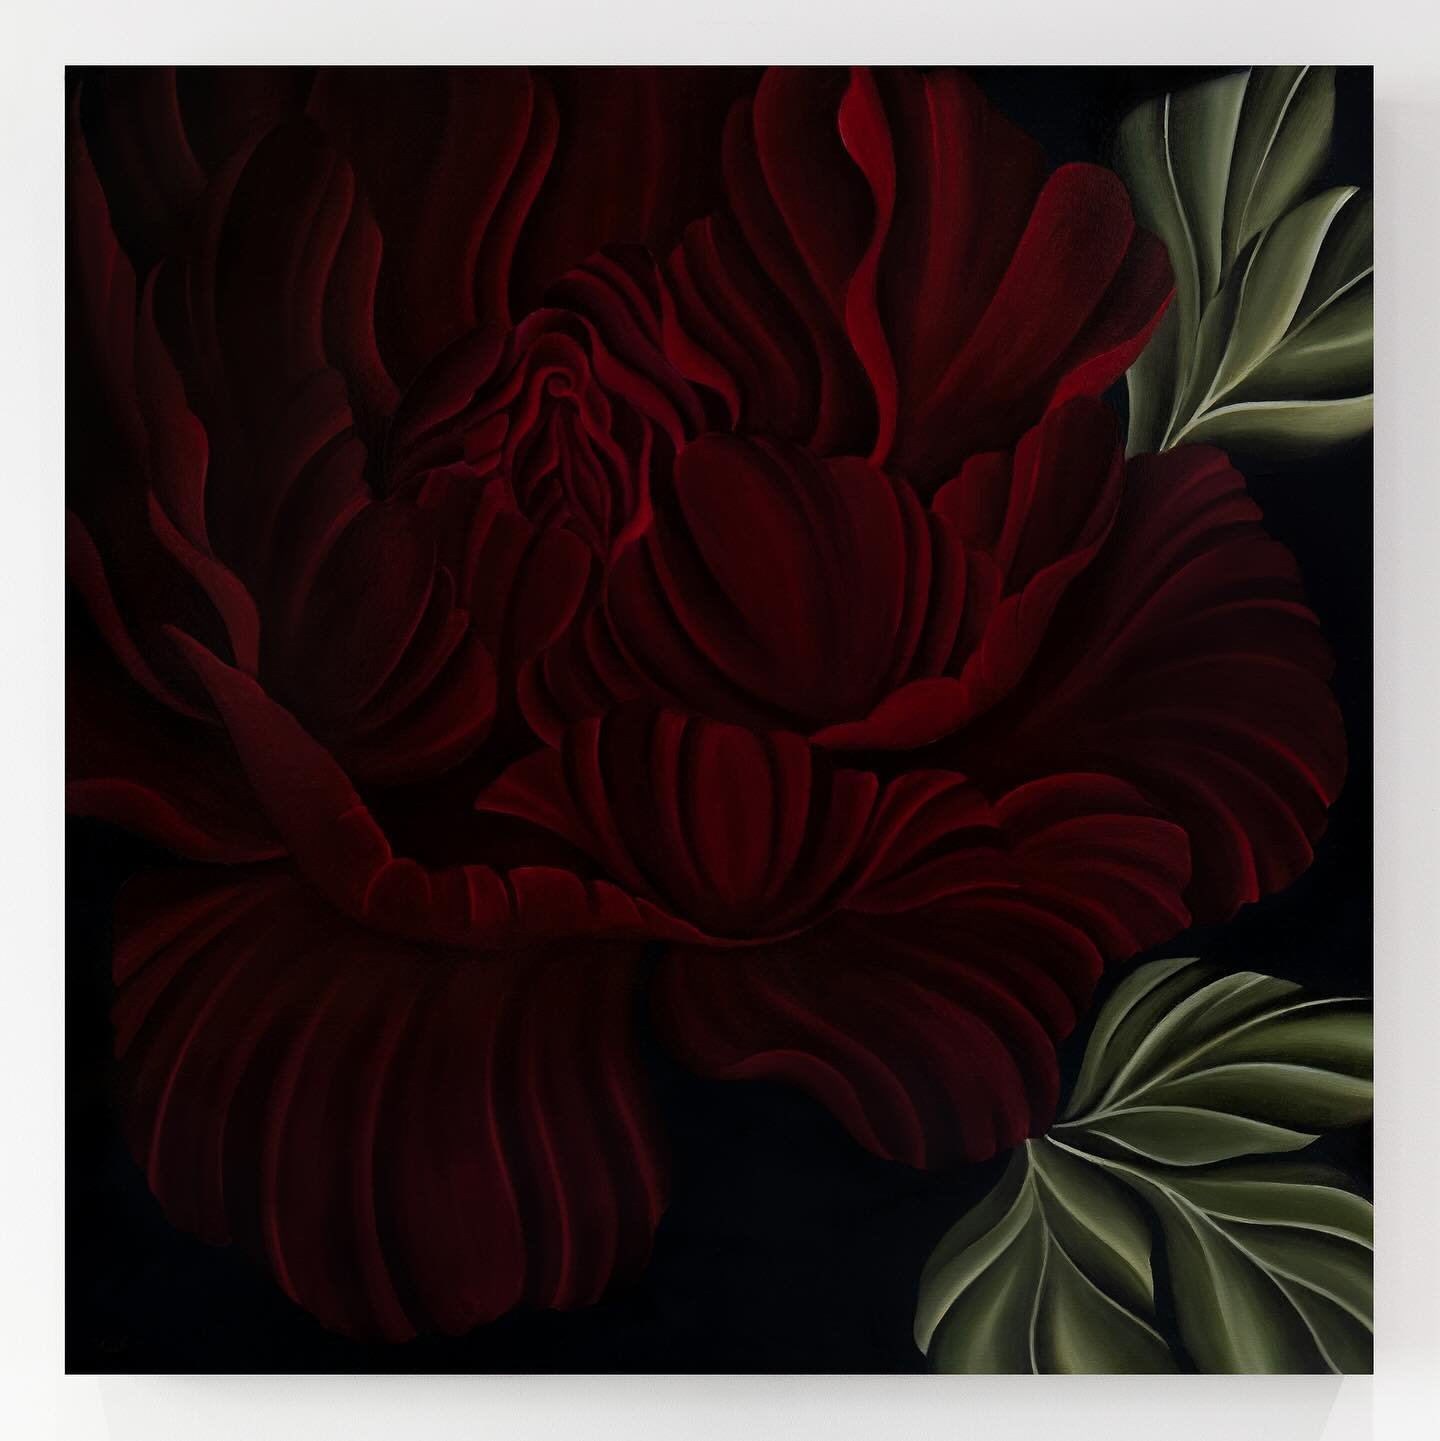 Red Peony
Oil on Canvas
100x100cm

Limited Edition Gicl&eacute;e prints of Red Peony are also  available. Visit my website or send a DM to purchase or for more information. 

#floralpainting #flowerpainting #botanicalart #oilpainting #fineart #contem